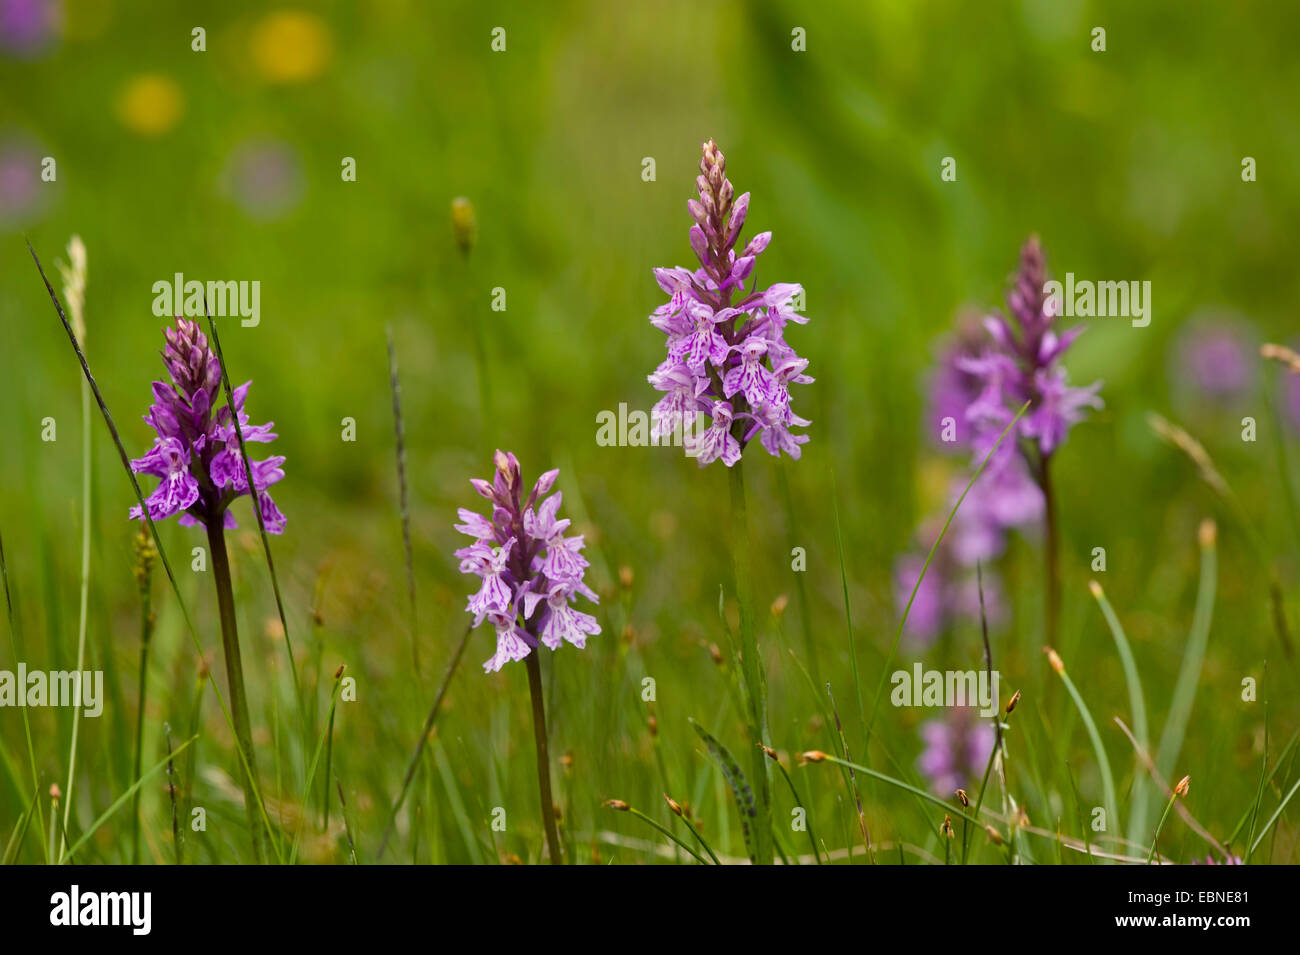 common spotted-orchid (Dactylorhiza fuchsii, Dactylorhiza maculata ssp. fuchsii), blooming in a meadow, Switzerland, Bernese Oberland Stock Photo